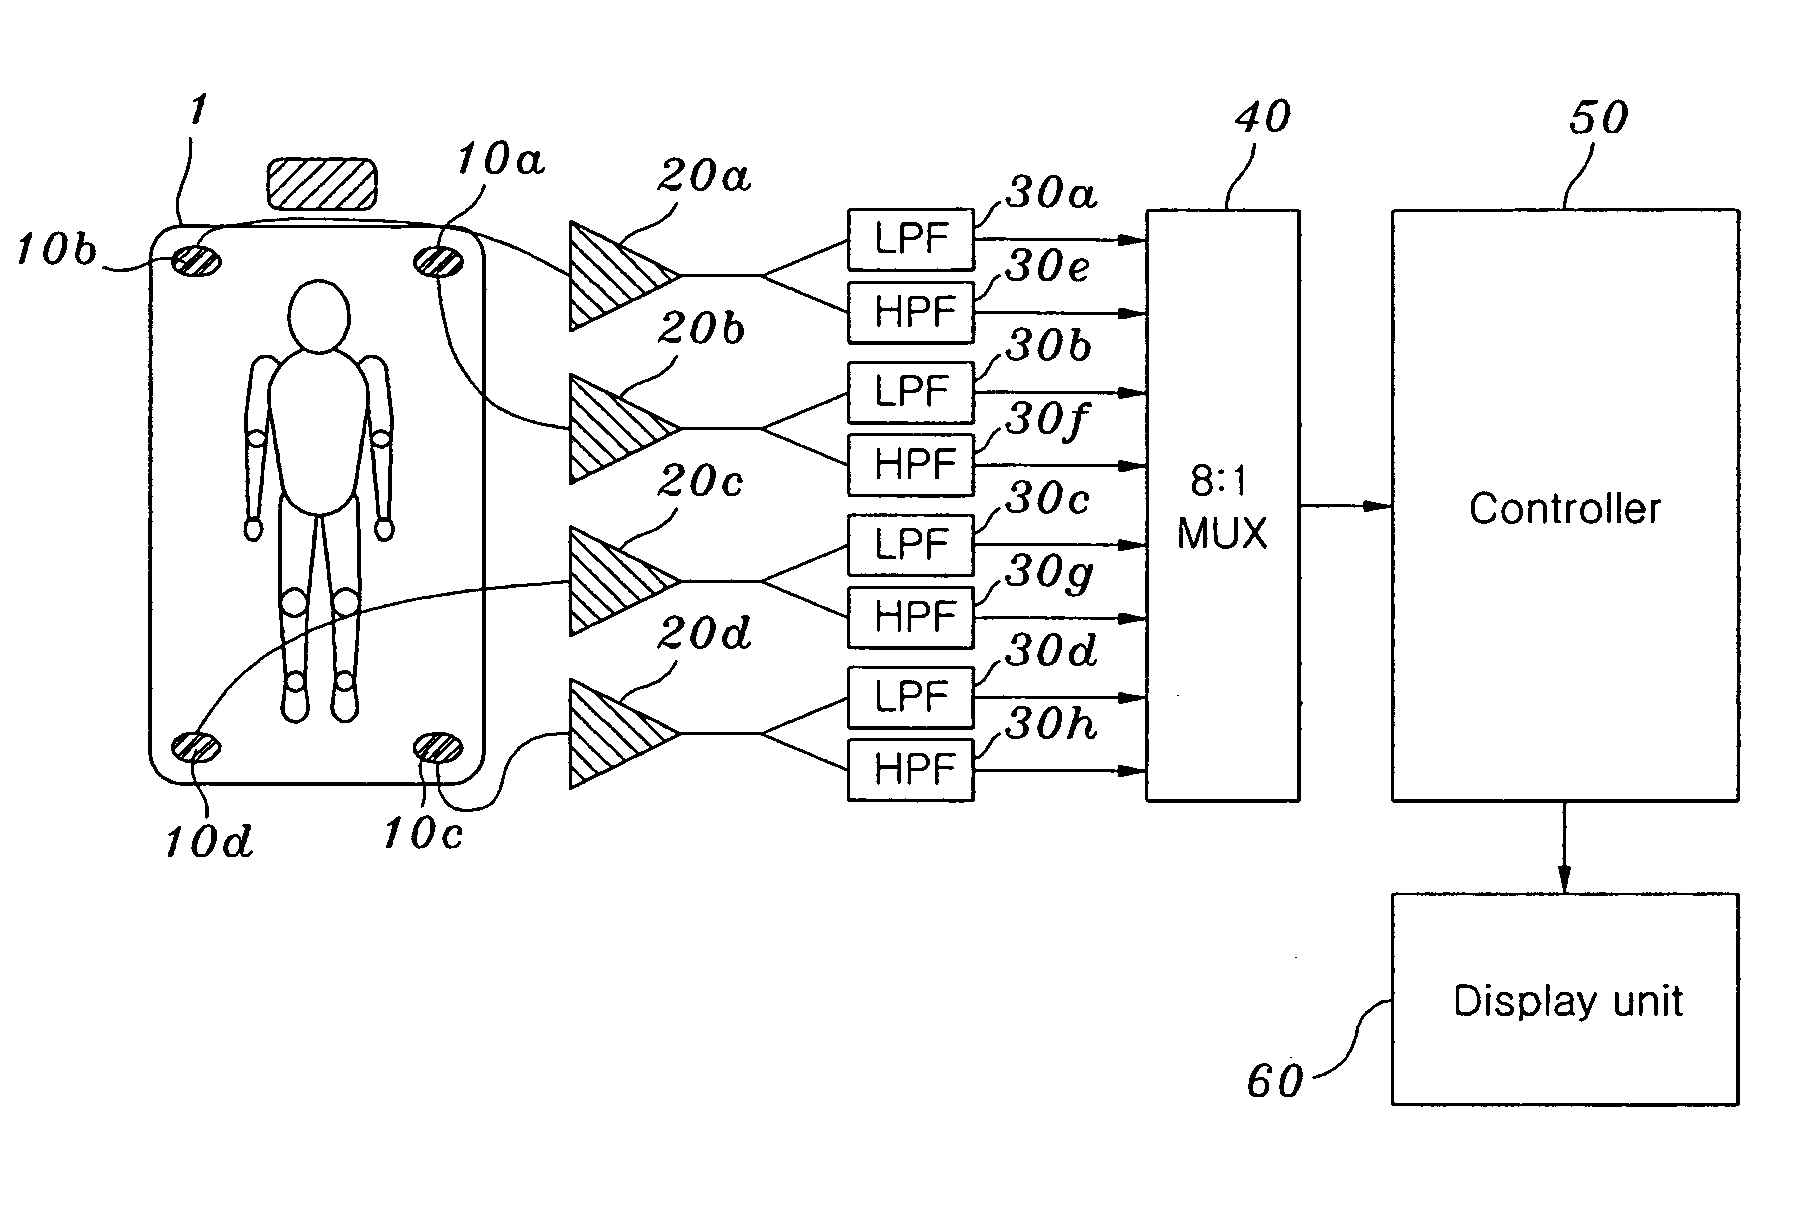 Apparatus for analyzing a sleep structure according to non-constrained weight detection